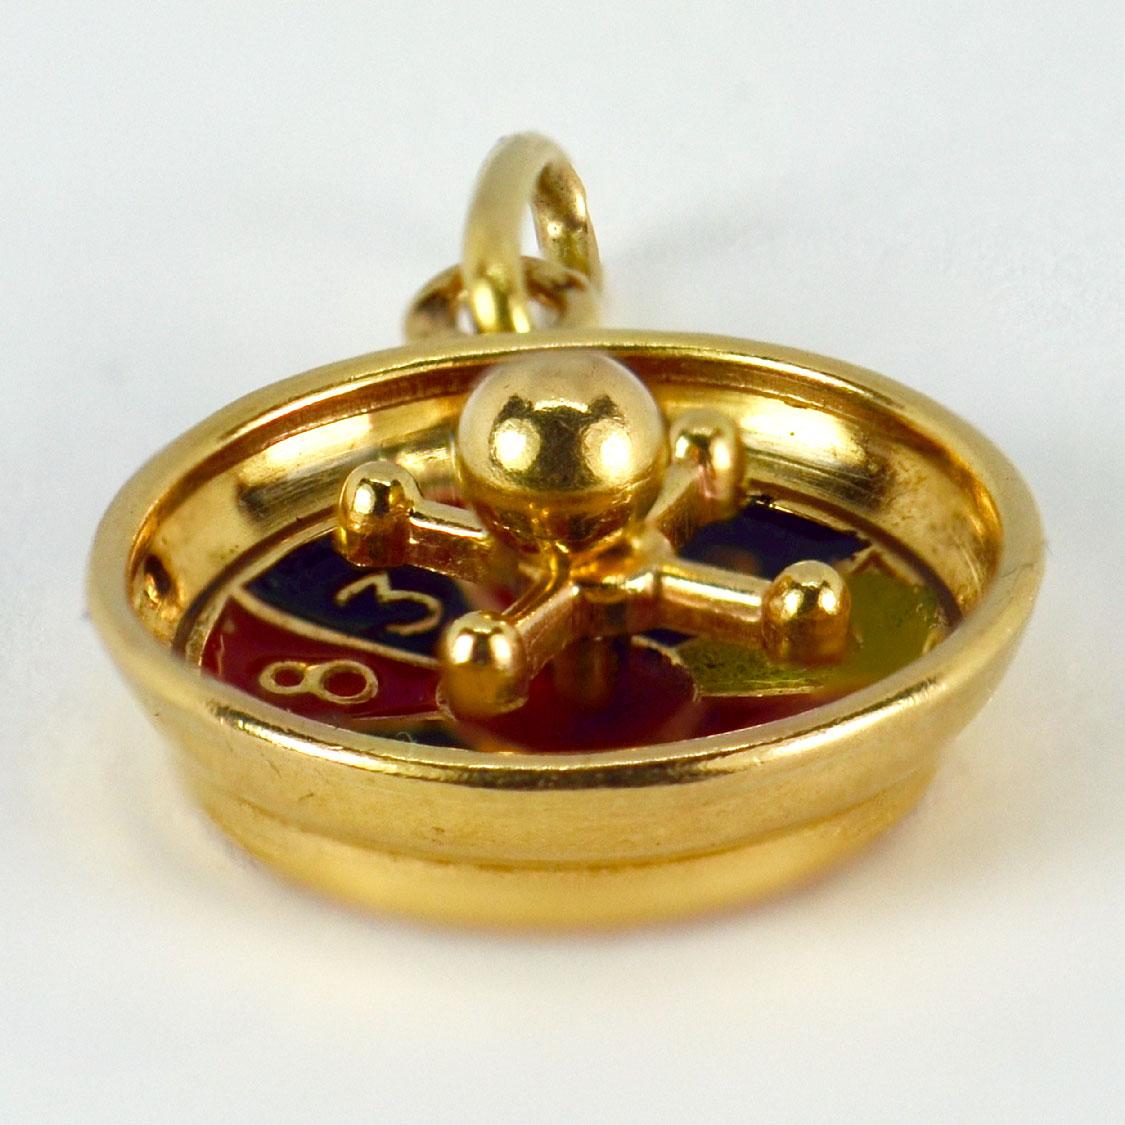 A French 18 karat (18K) yellow gold charm pendant designed as a roulette wheel. Stamped with the eagles head for French manufacture and 18 karat gold with an unknown maker’s mark.

Dimensions: 1.7 x 1.4 x 0.65 cm (not including jump ring)
Weight: